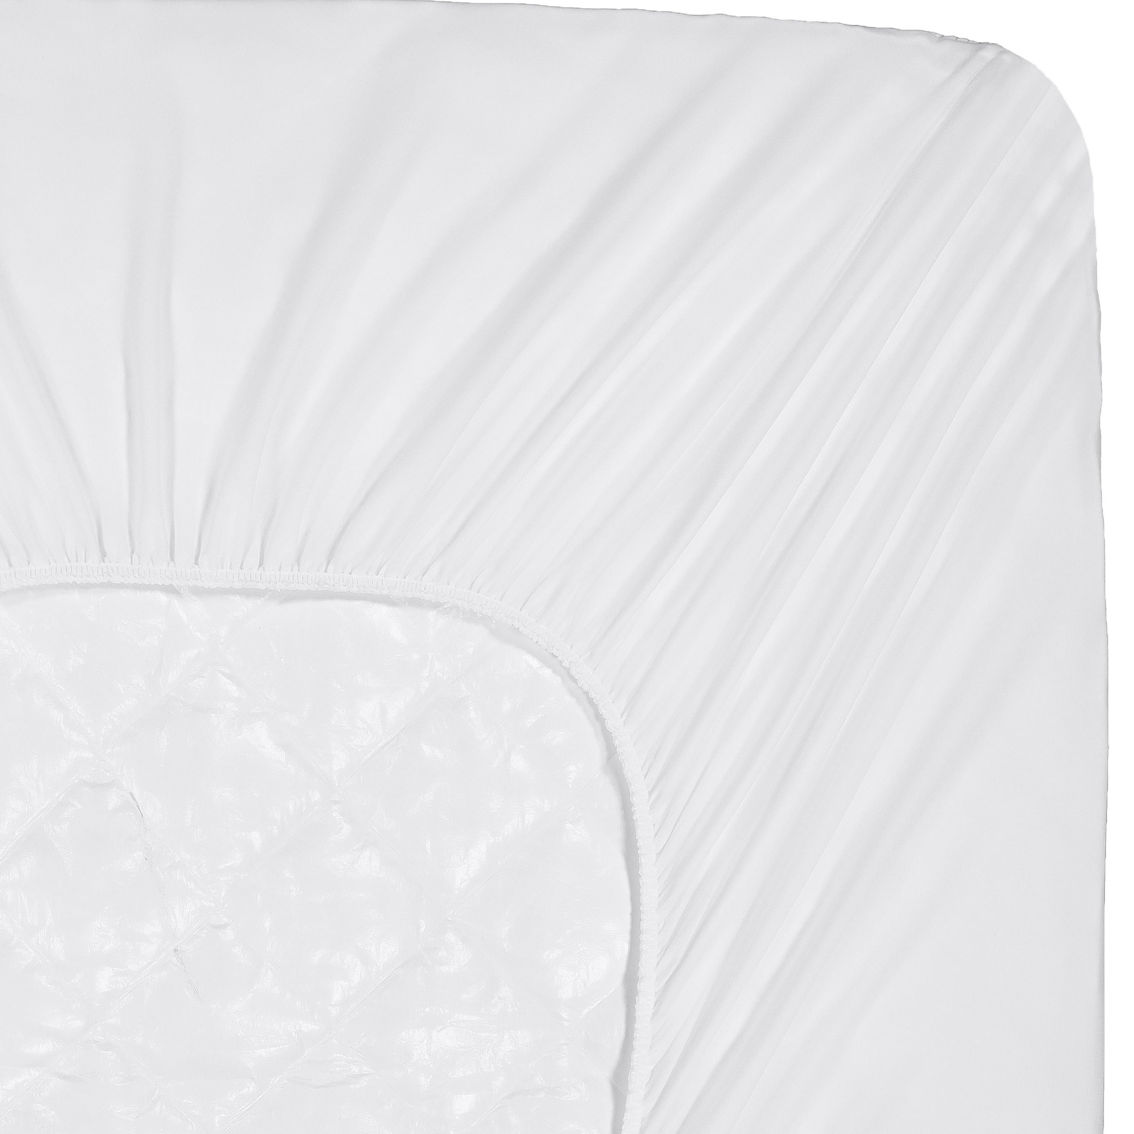 Serta Simply Clean Triple Action Mattress Pad - Image 3 of 4